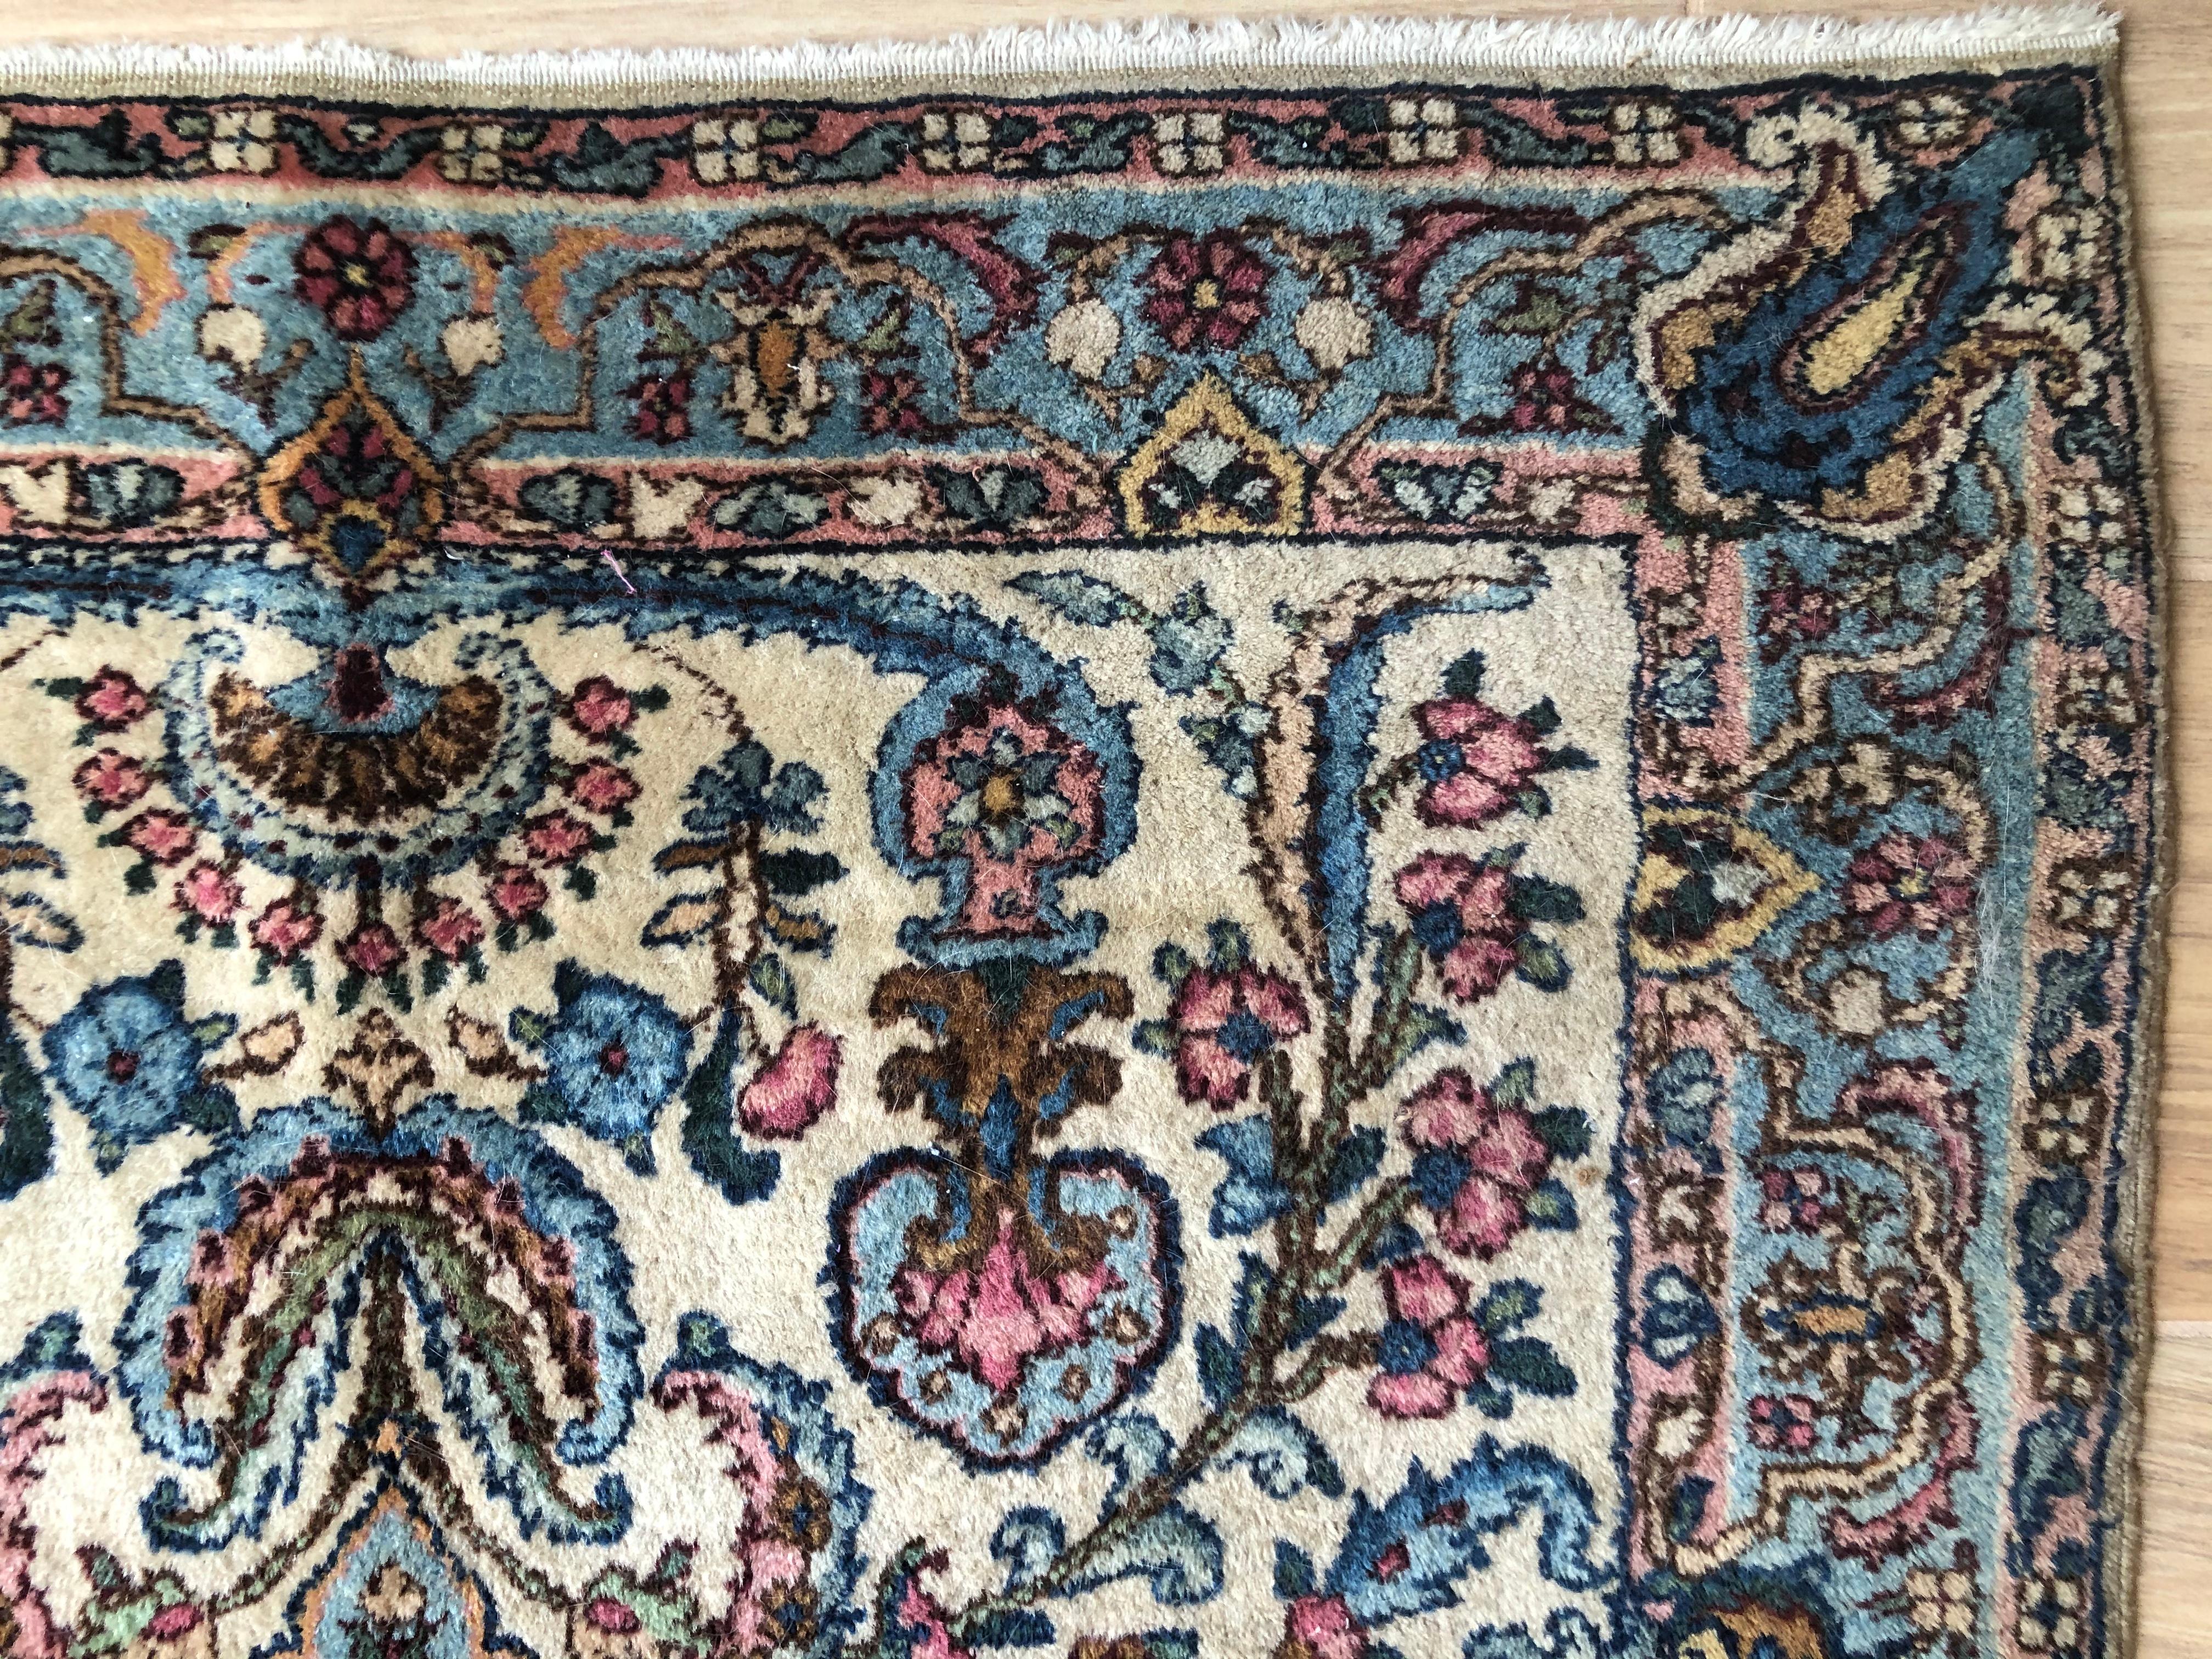 Hand-Woven Handwoven Square Fine Wool Persian Rug